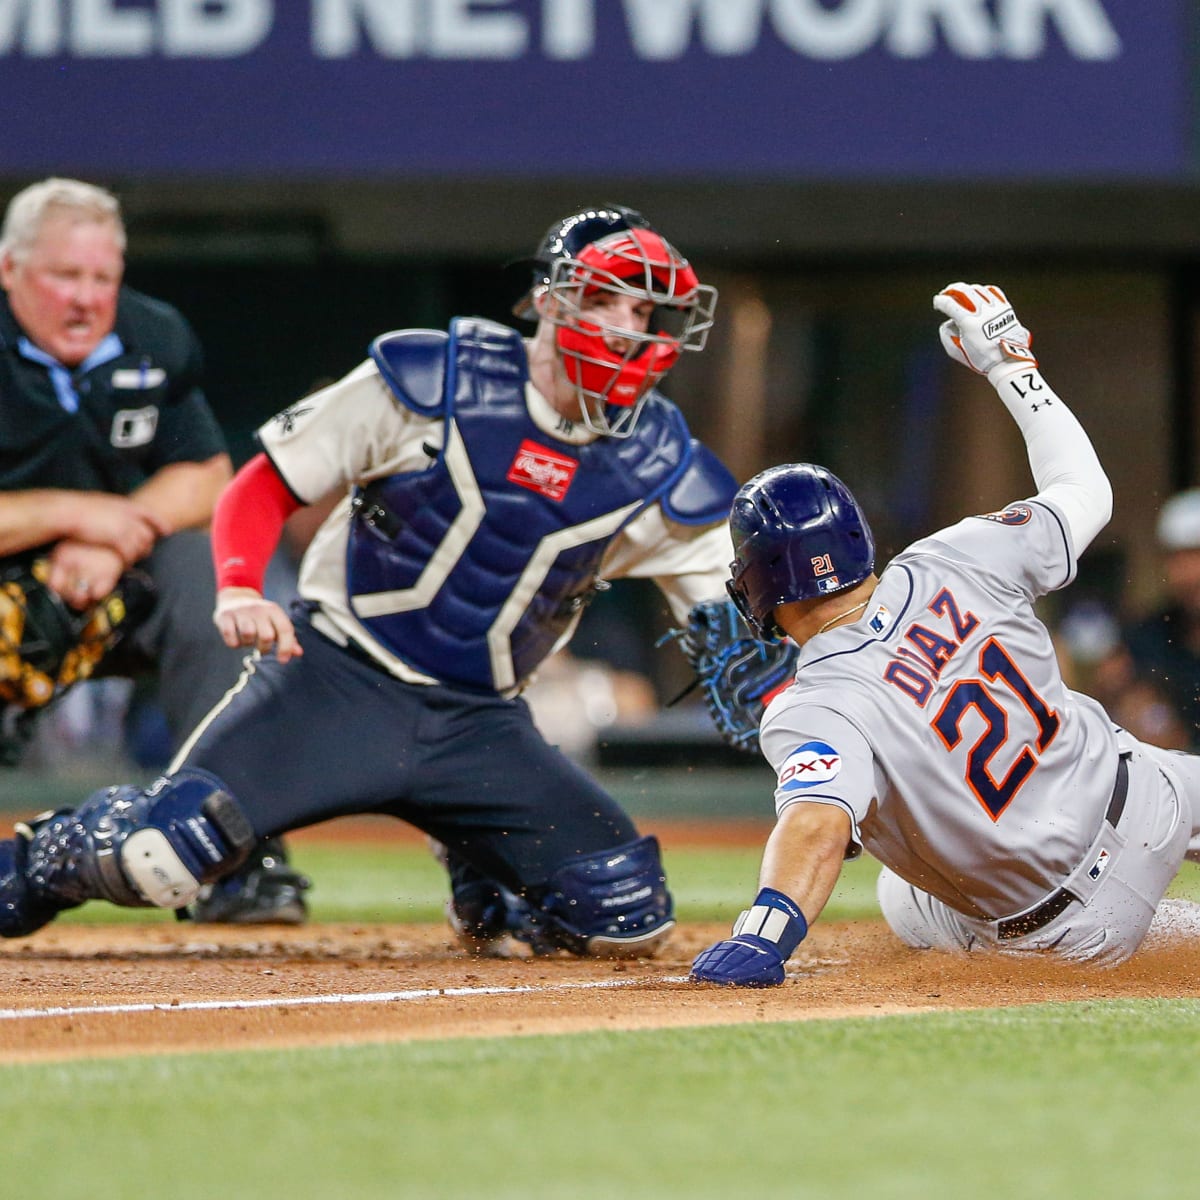 Lone Star Shootout: Astros rally for 12-11 win to take series over